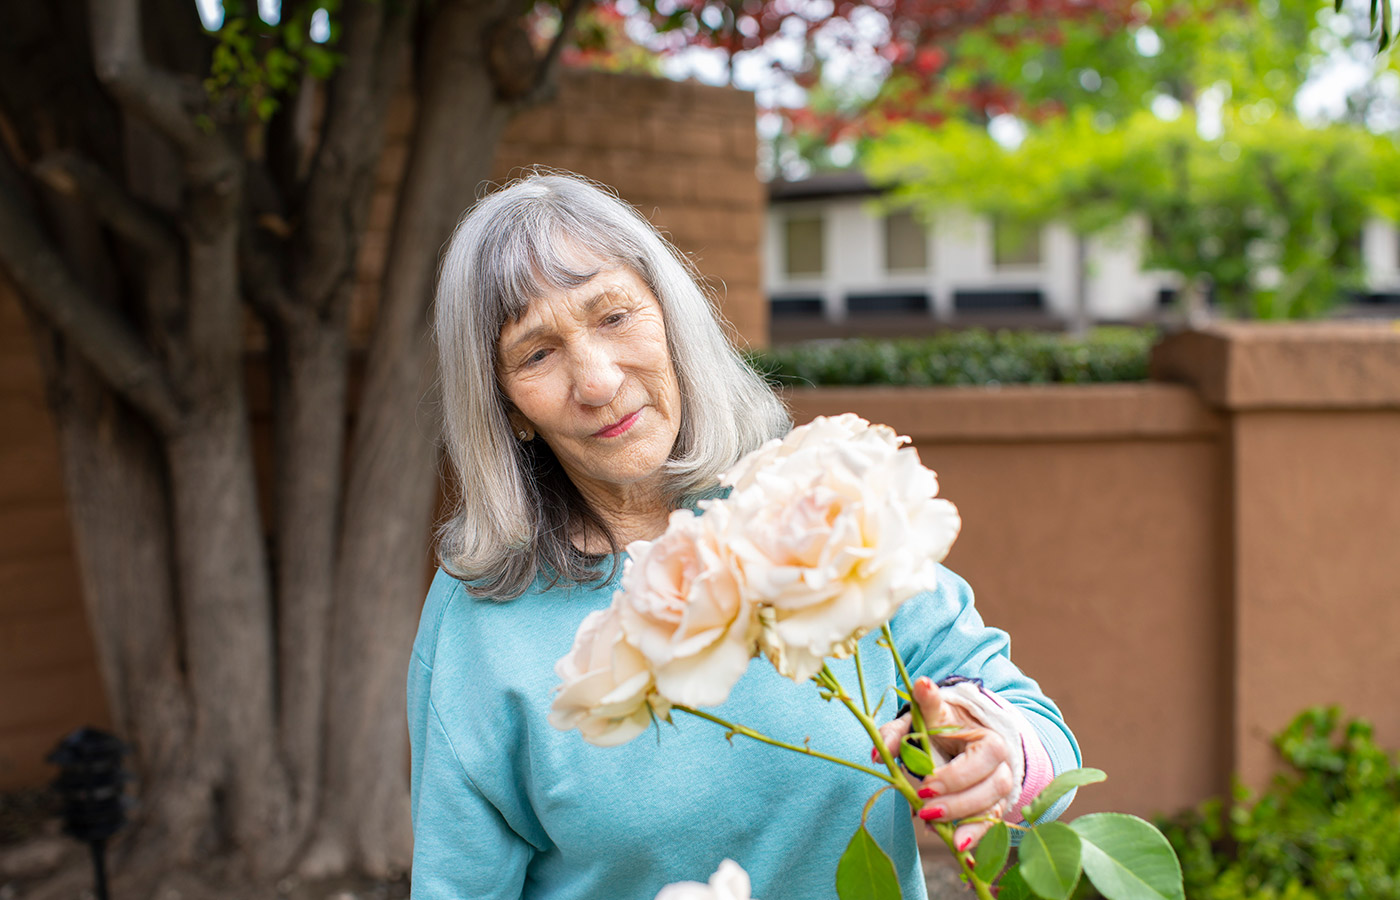 A resident is holding flowers.